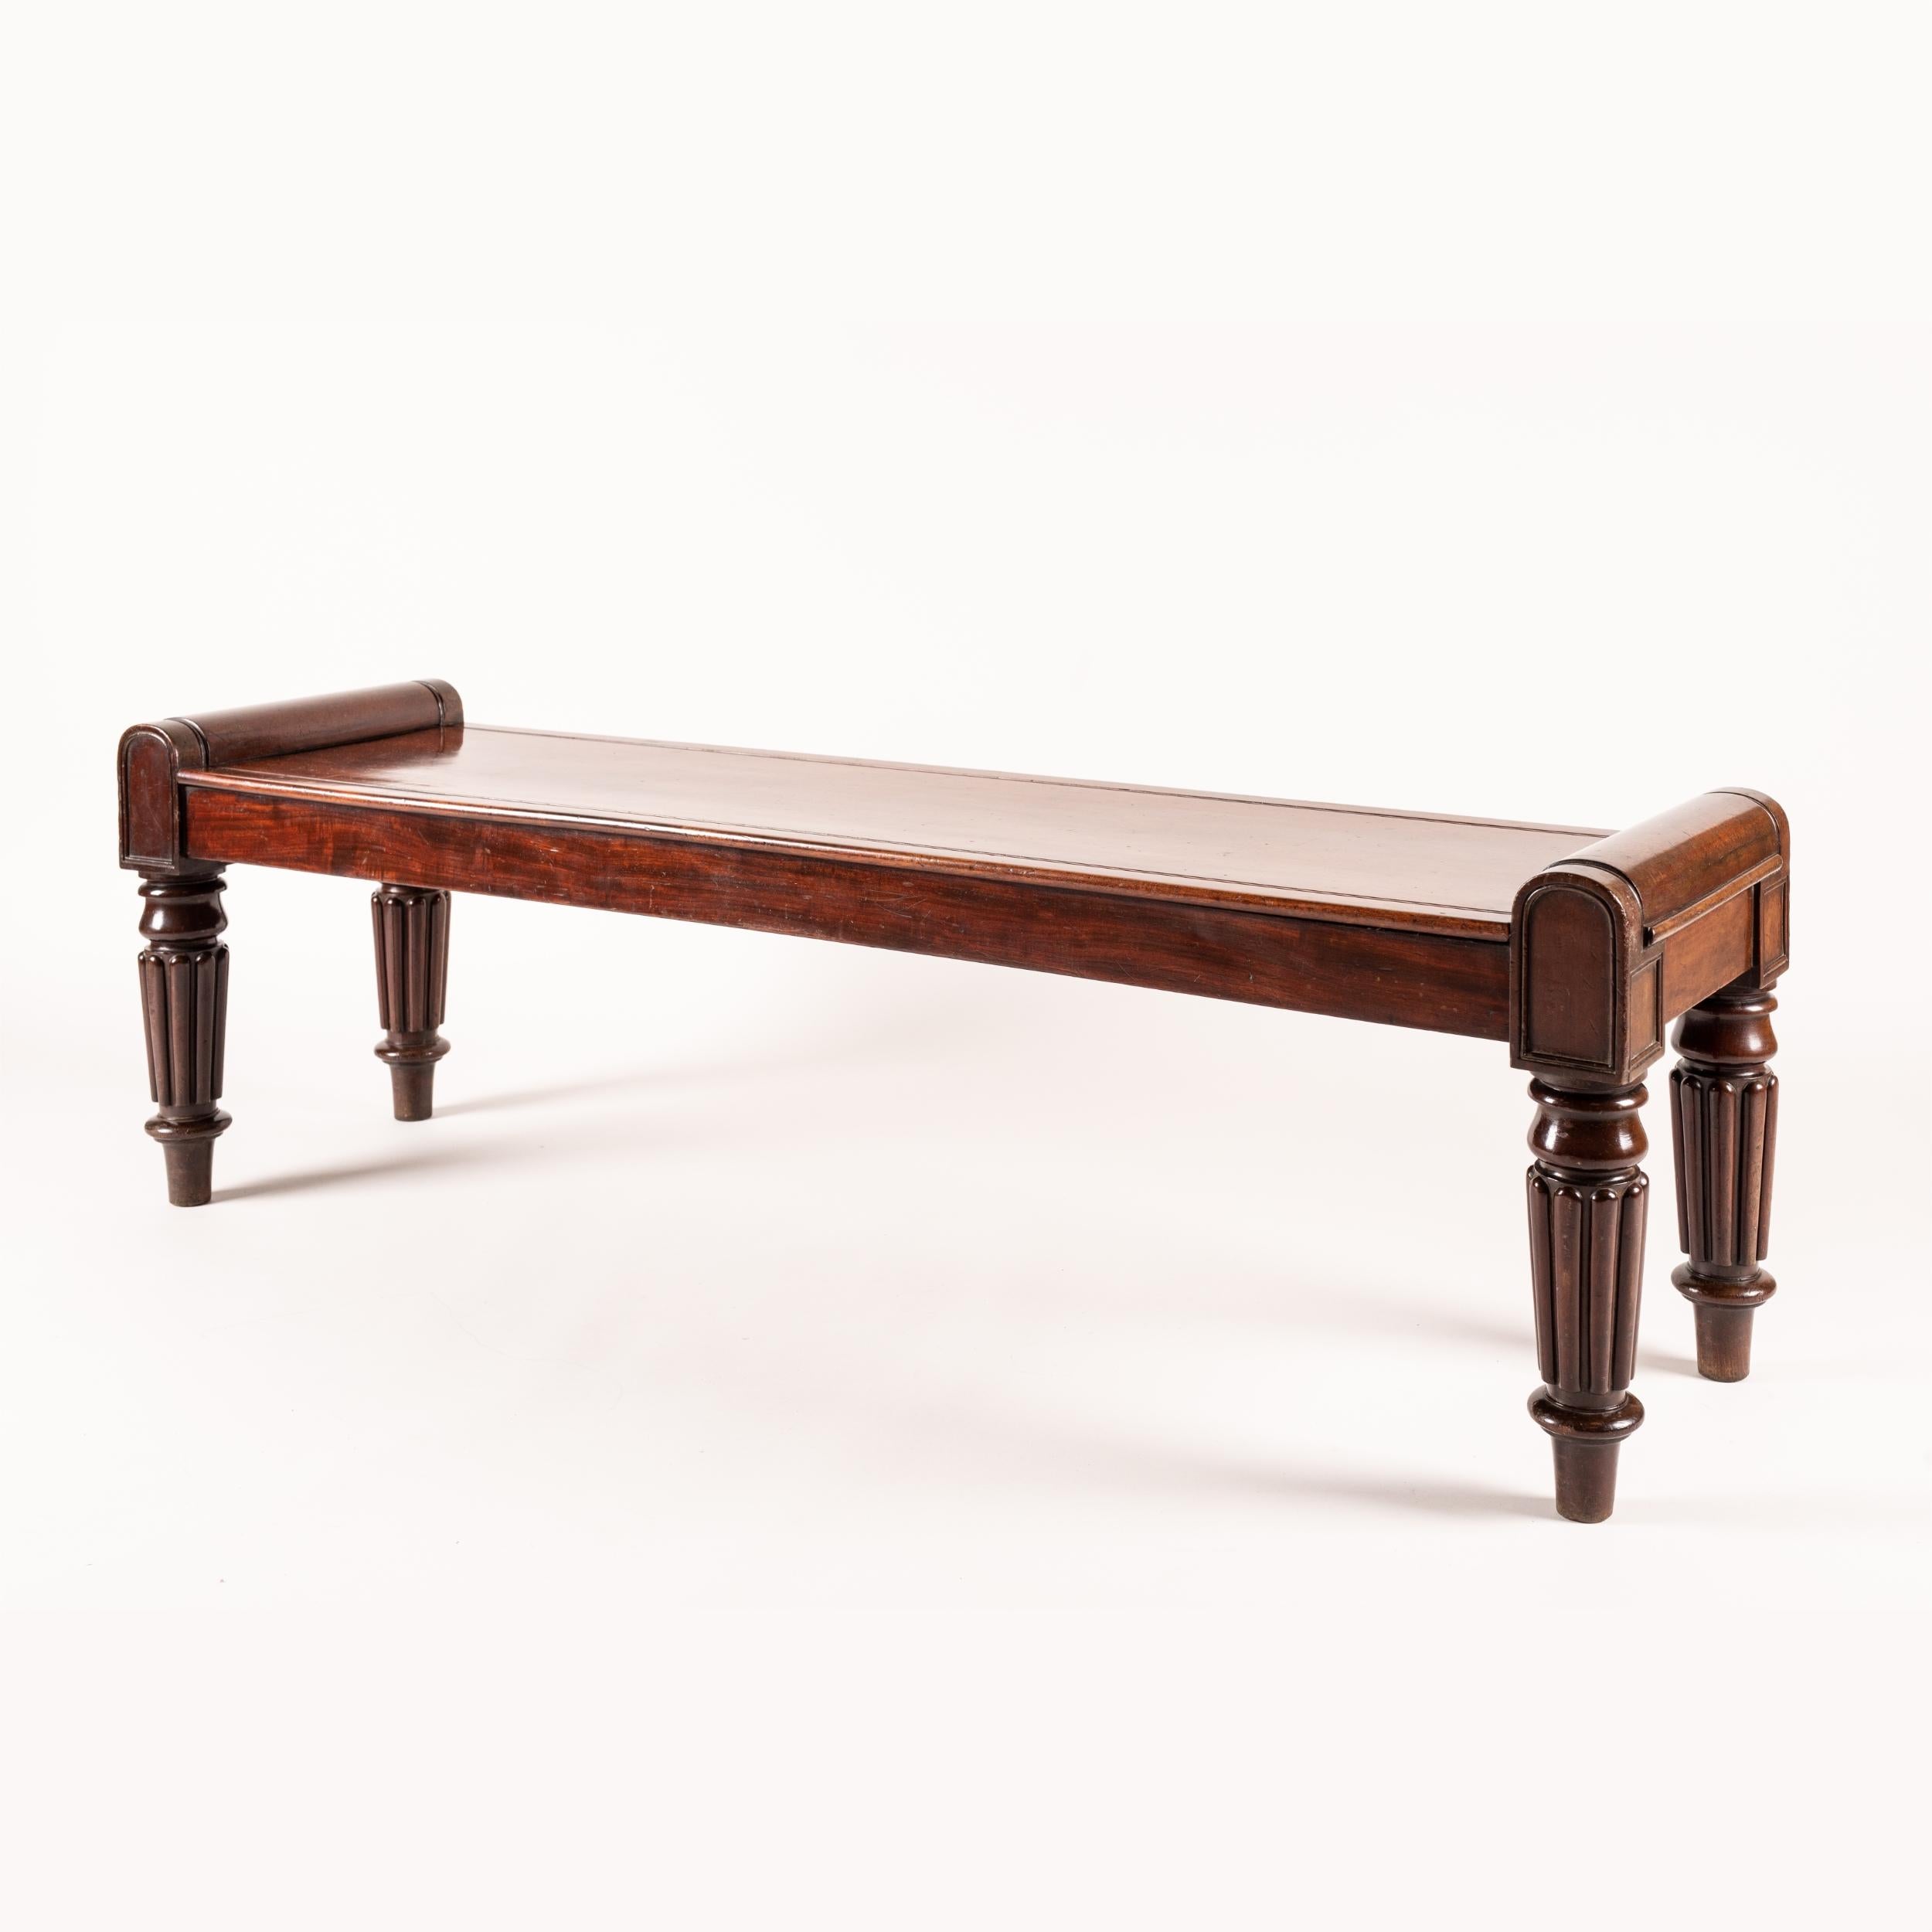 A late Georgian Period hall bench

Constructed from well-figured San Domingo mahogany, the bench supported on tapering ring-turned and lobed legs, terminating in rounded capitals, with the seat with carved recessed details.
English, circa